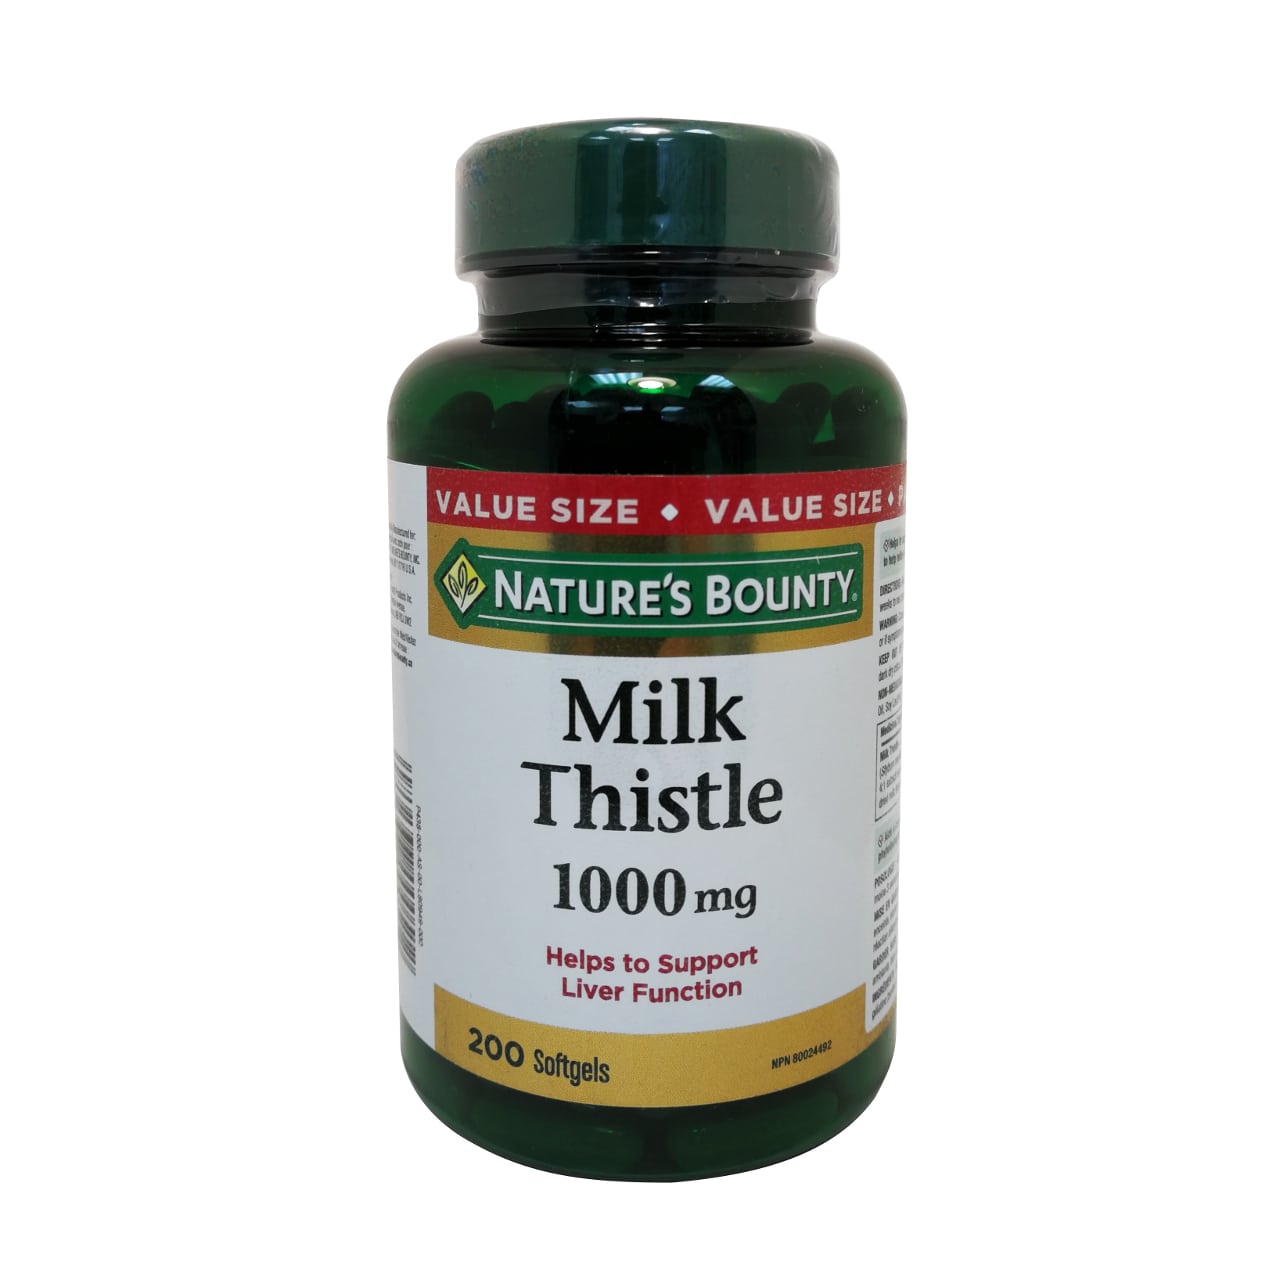 Product label for Nature's Bounty Milk Thistle 1000mg in English